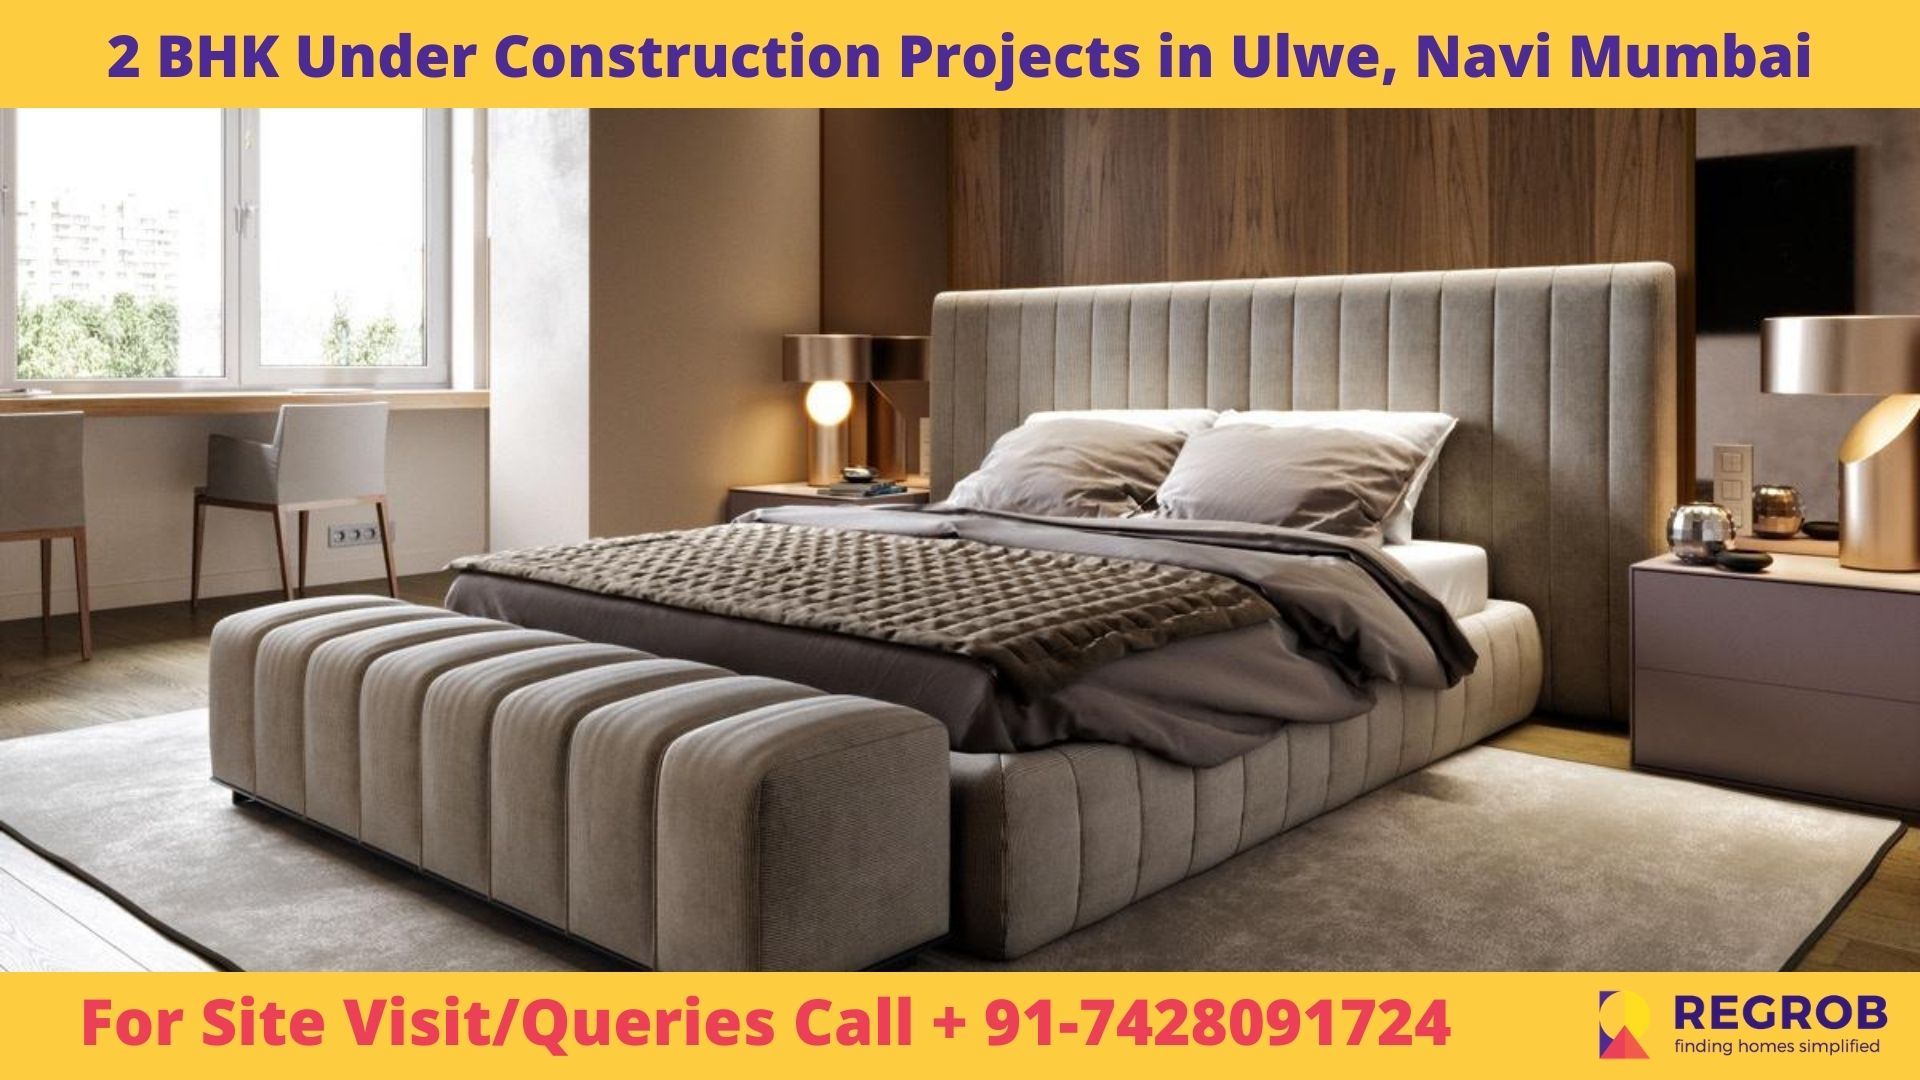 2 BHK Under Construction Projects in Ulwe, Navi Mumbai